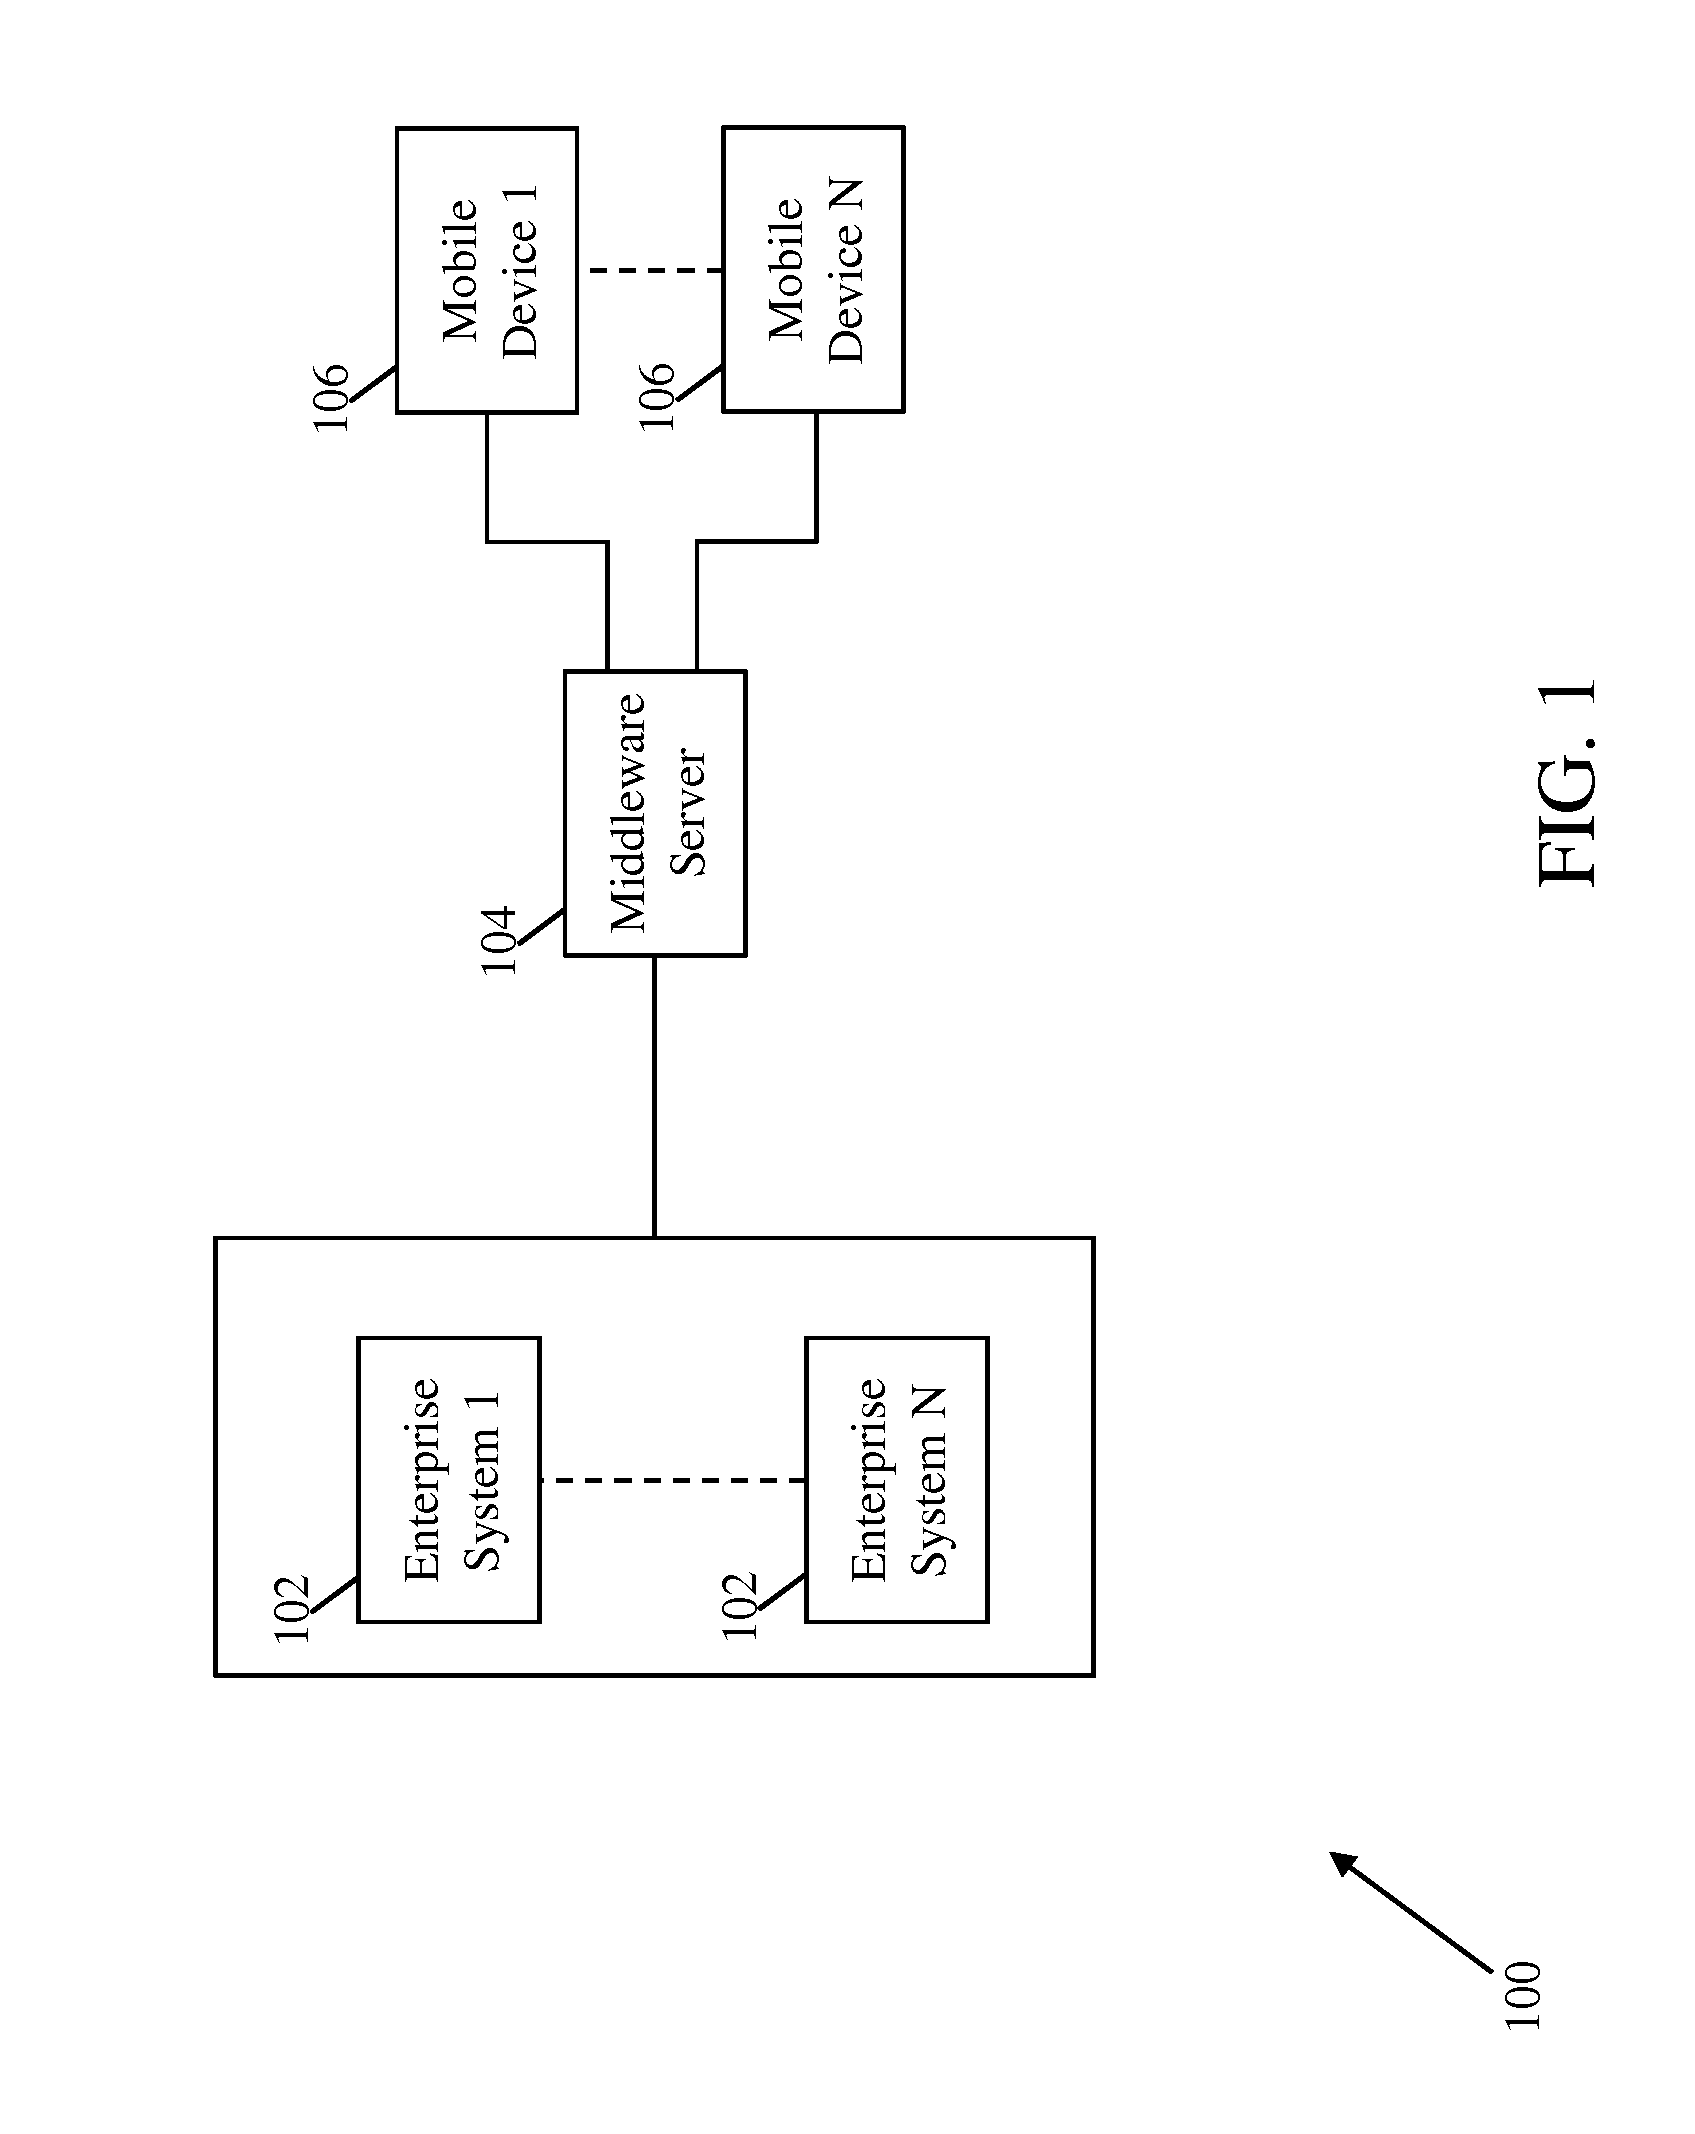 System and method for aggregating and providing data from enterprise systems to mobile devices